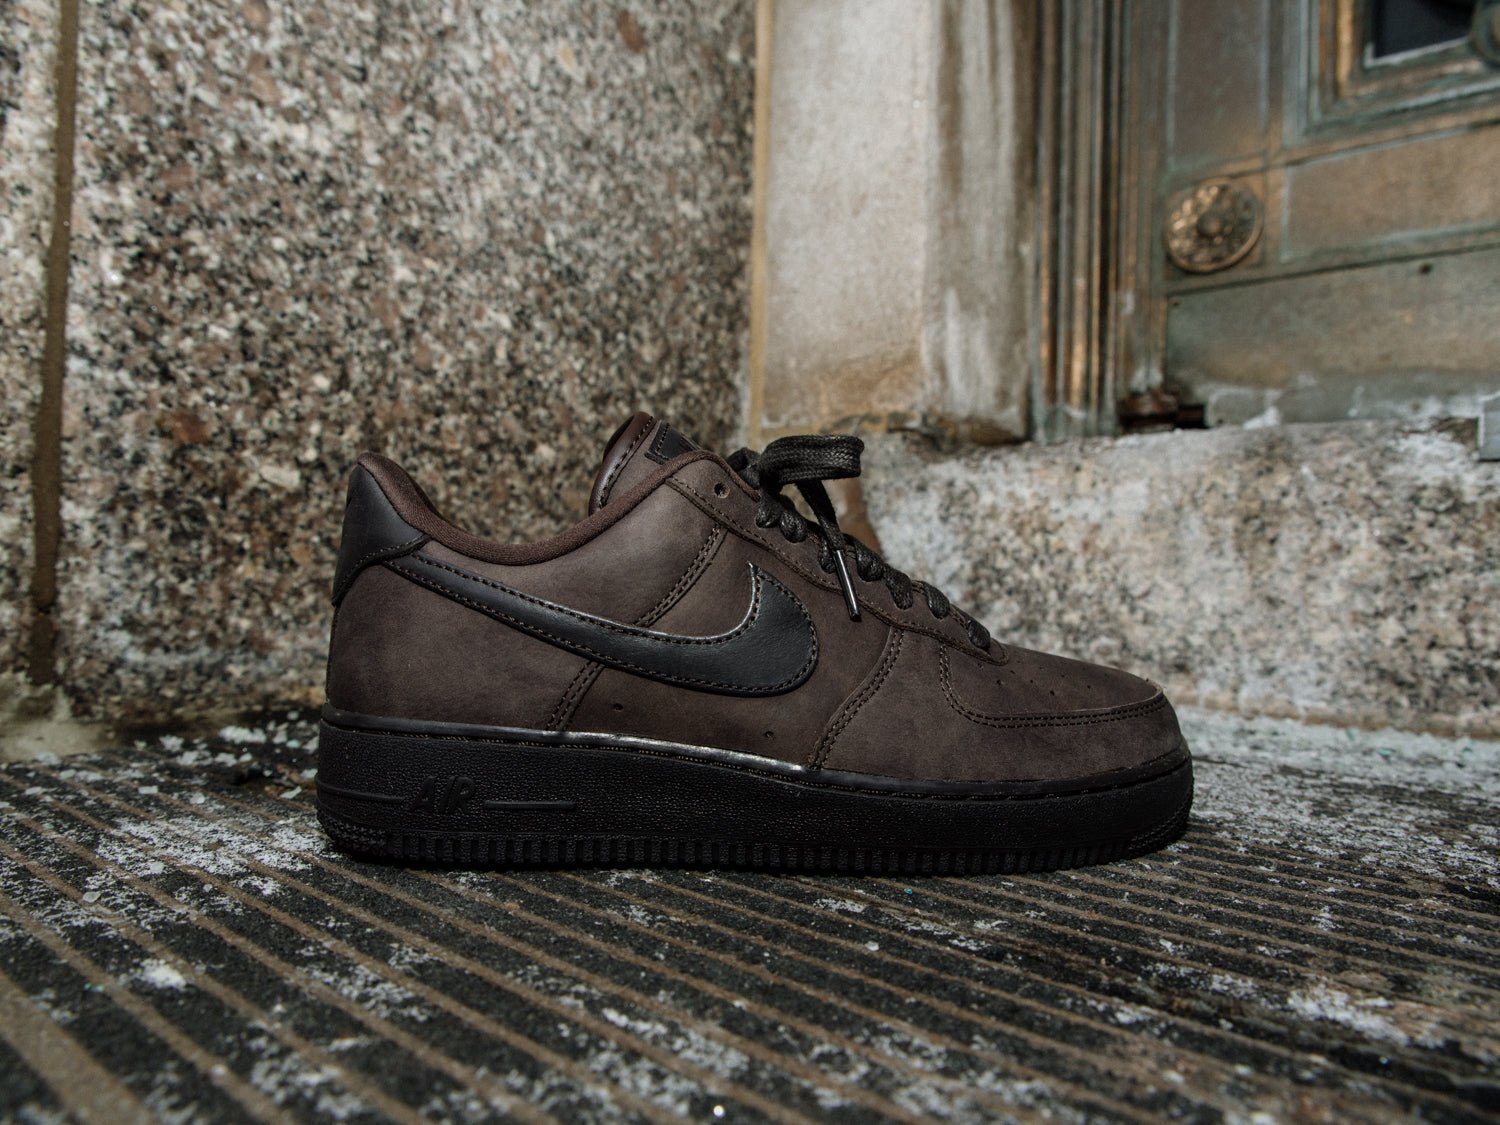 Nike Air Force 1 Low Chocolate Brown DR9503-200